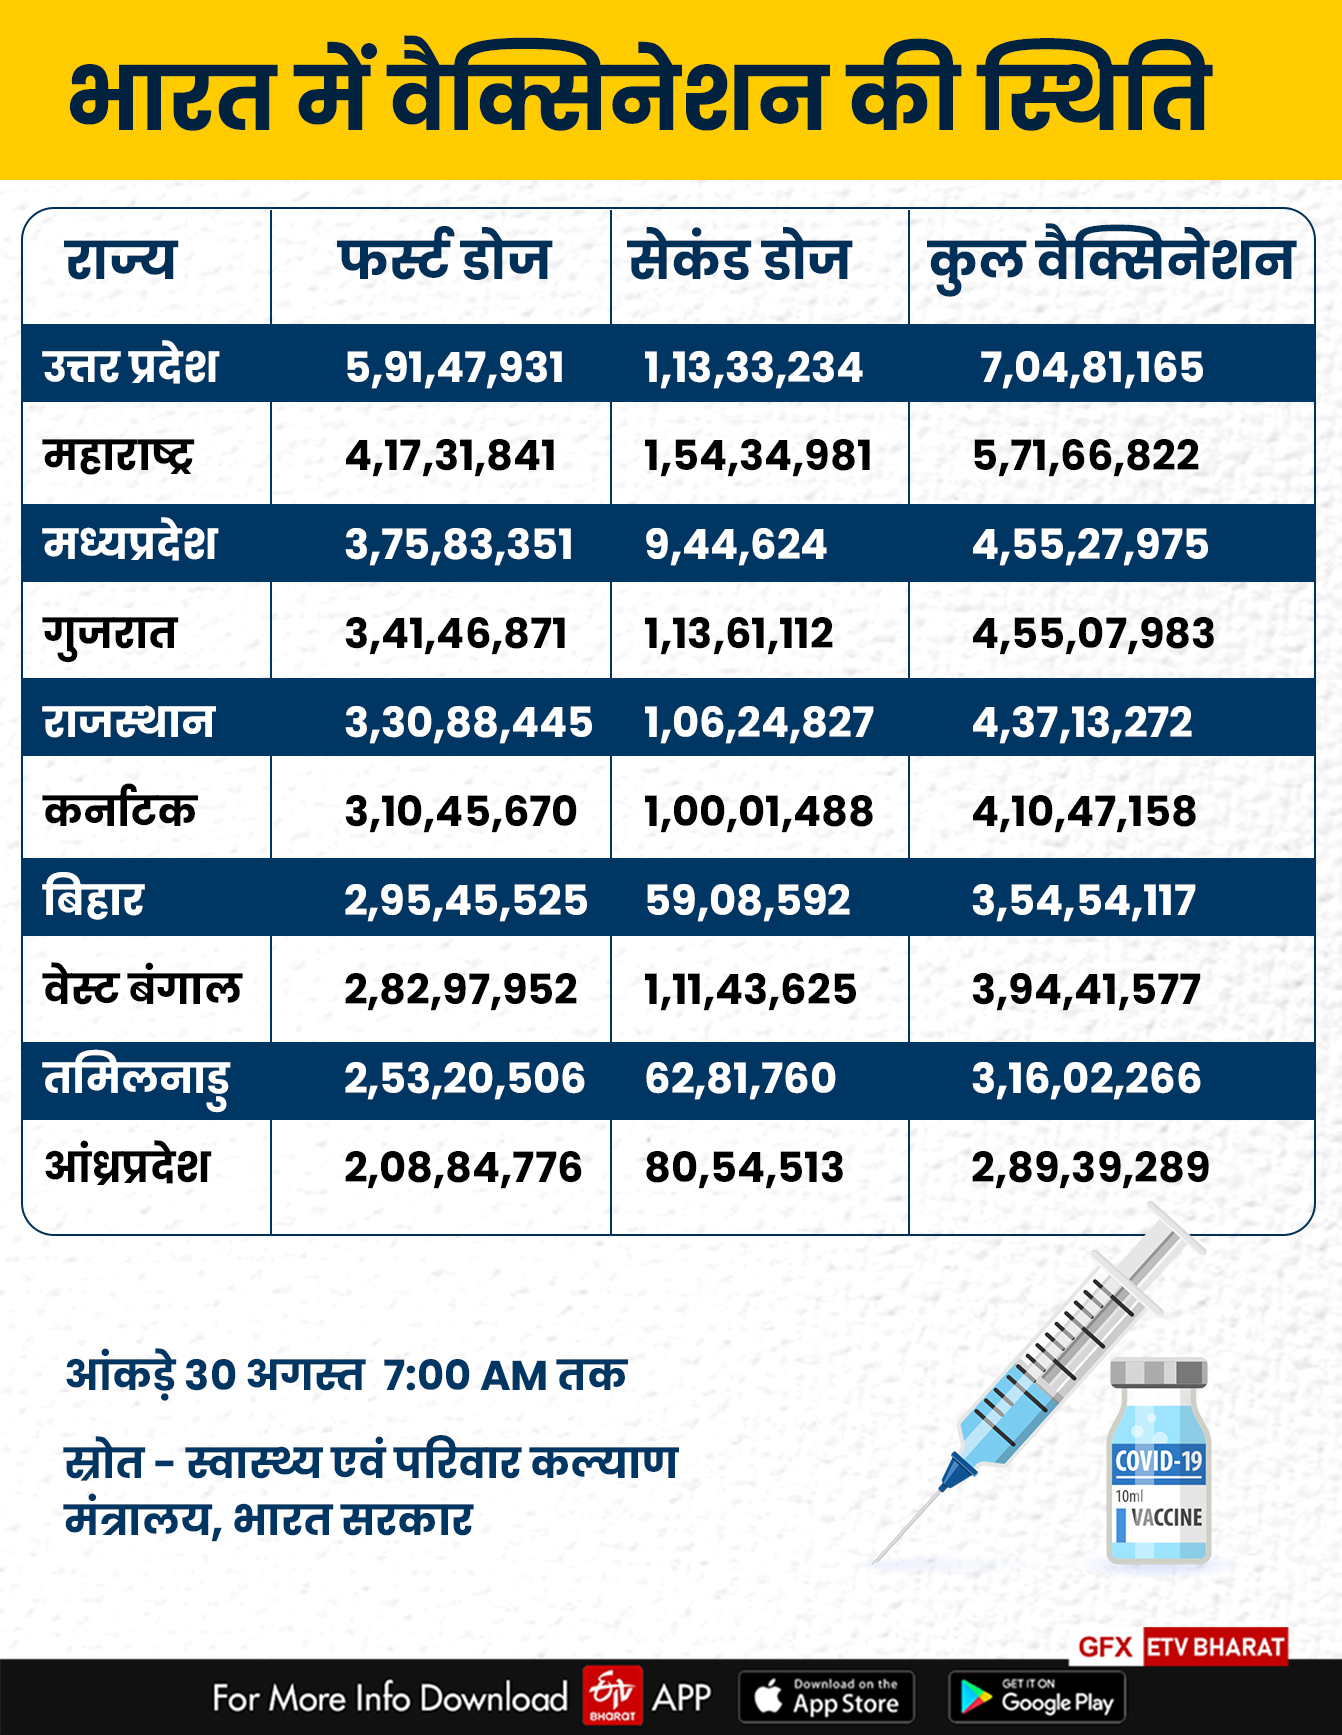 know about vaccination in india